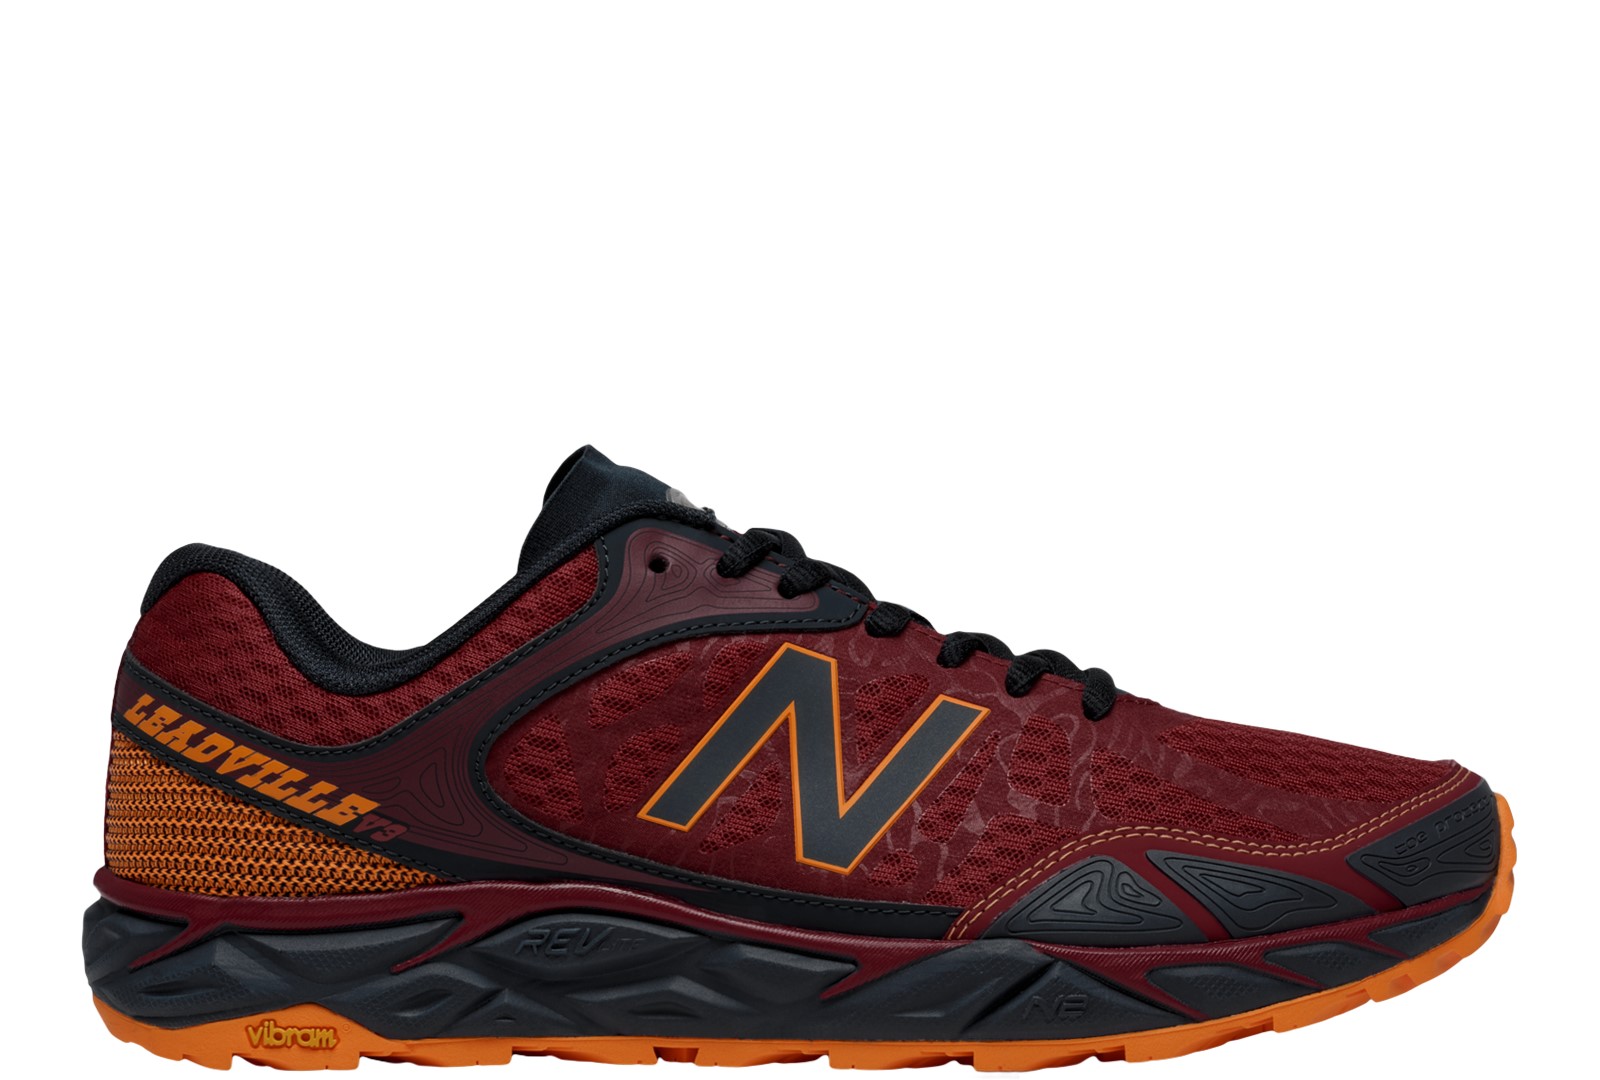 NEW BALANCE UPDATES THE LEADVILLE TRAIL